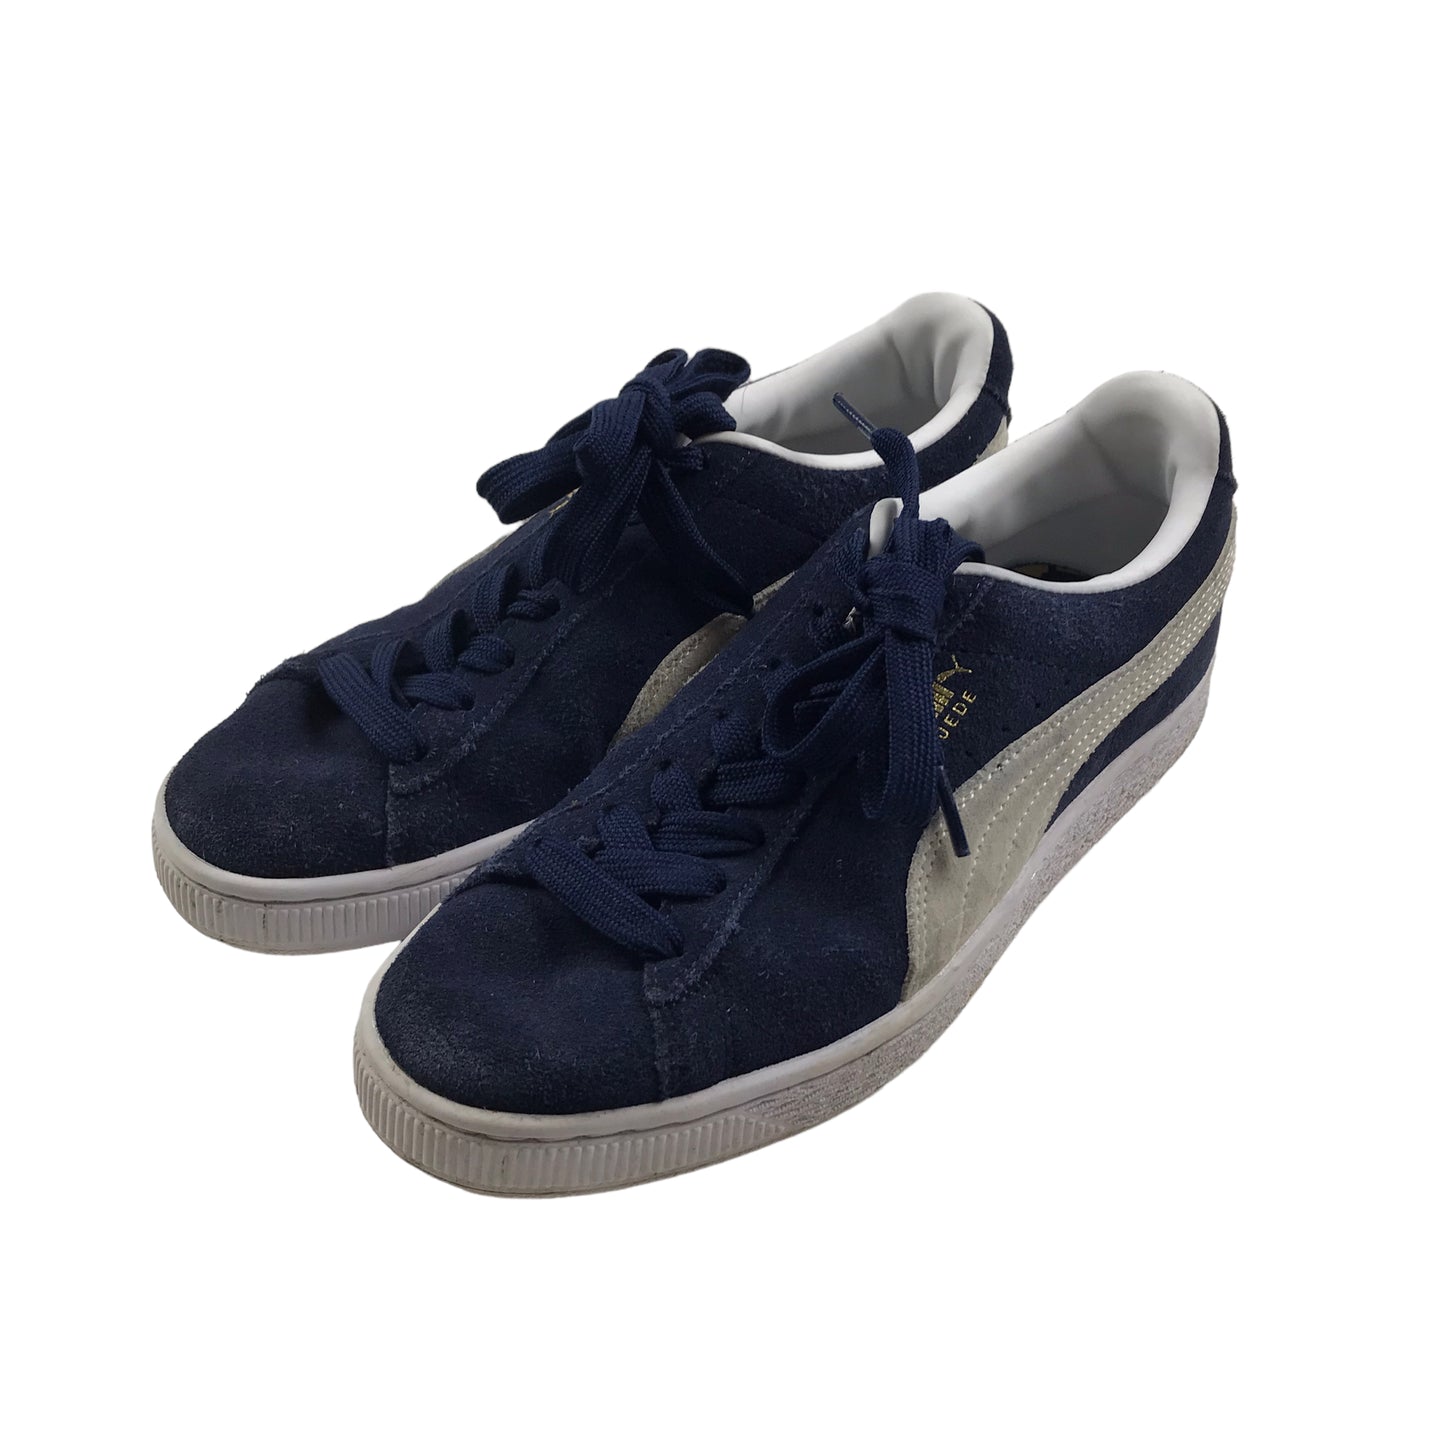 Puma Suede Navy Blue Trainers Shoe Size 5